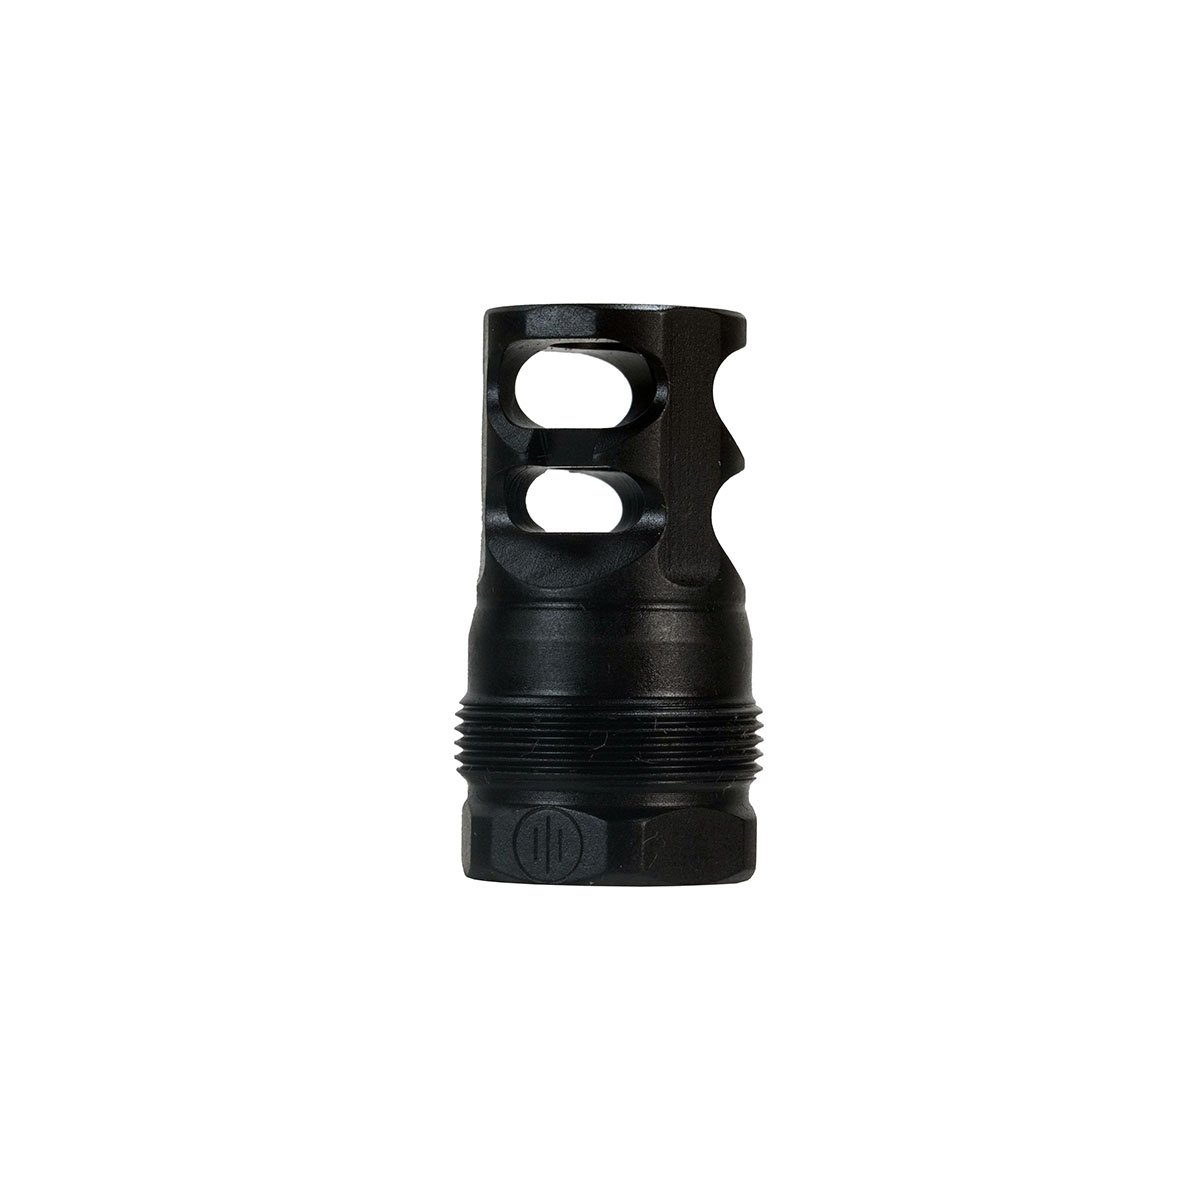 PRIMARY WEAPONS - FRC 308 CALIBER TWO-PORT COMPENSATOR